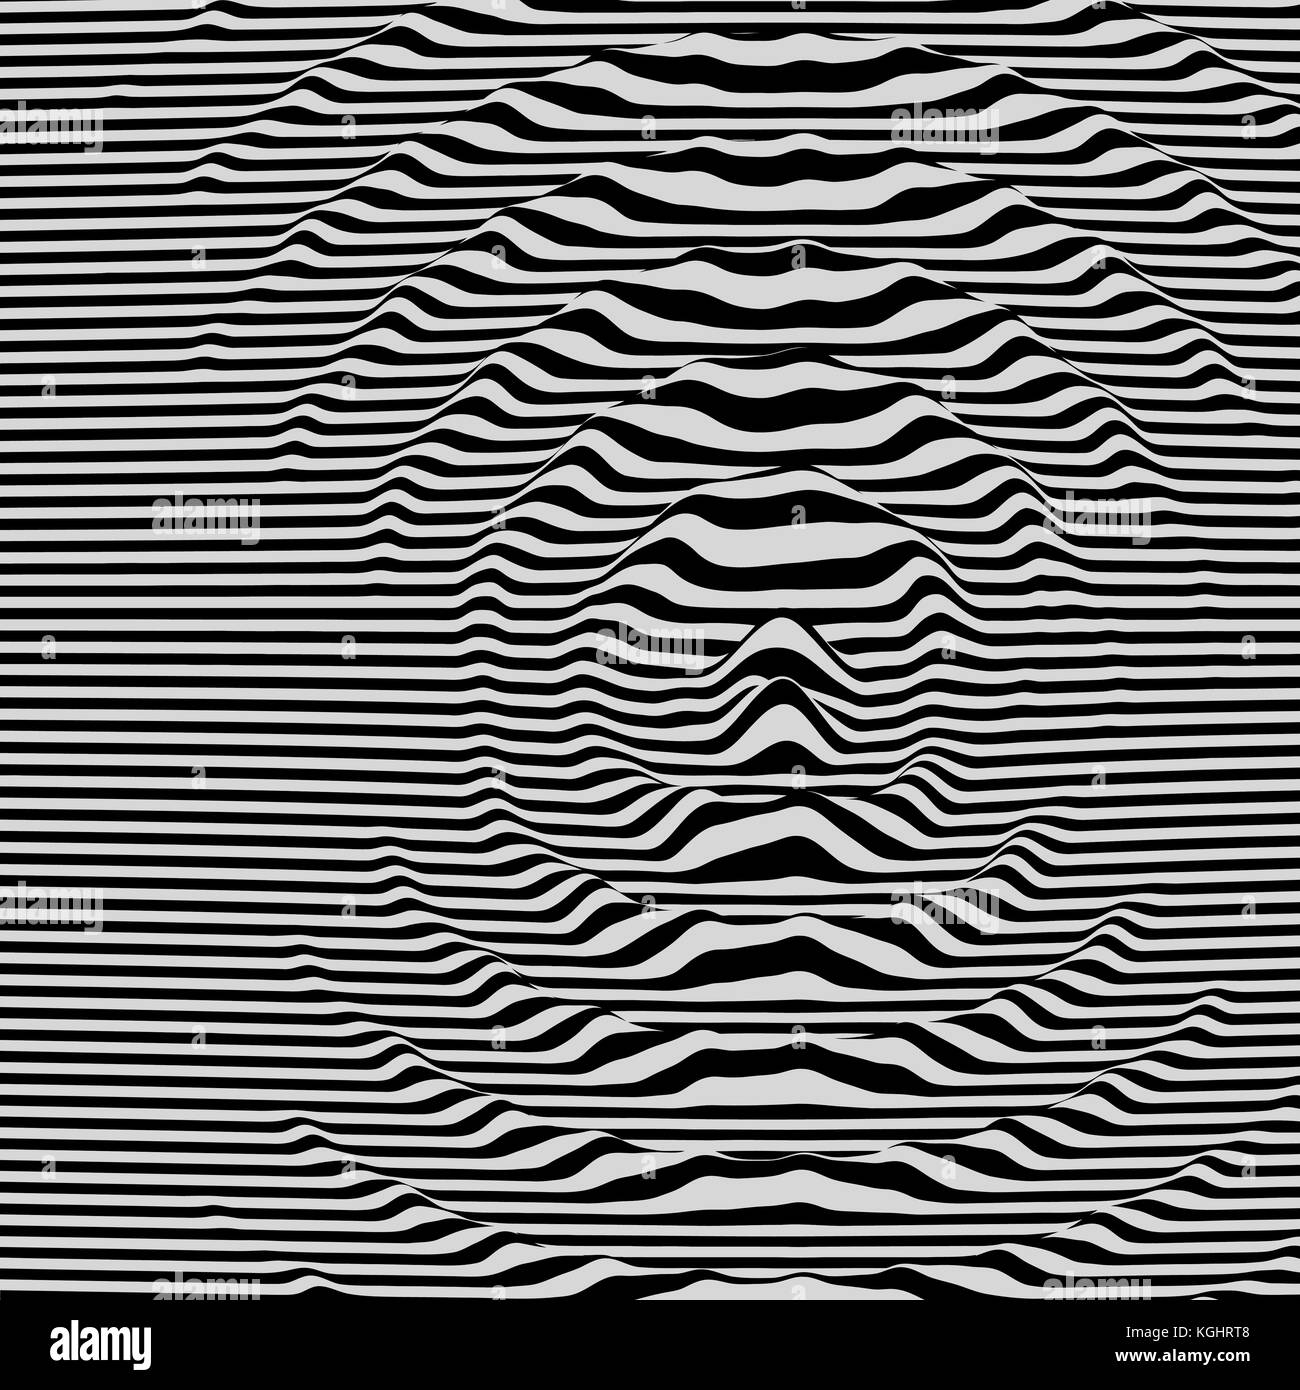 Waveform background. Dynamic visual effect. Surface distortion. Pattern with optical illusion. Vector striped illustration. Black and white sound wave Stock Vector